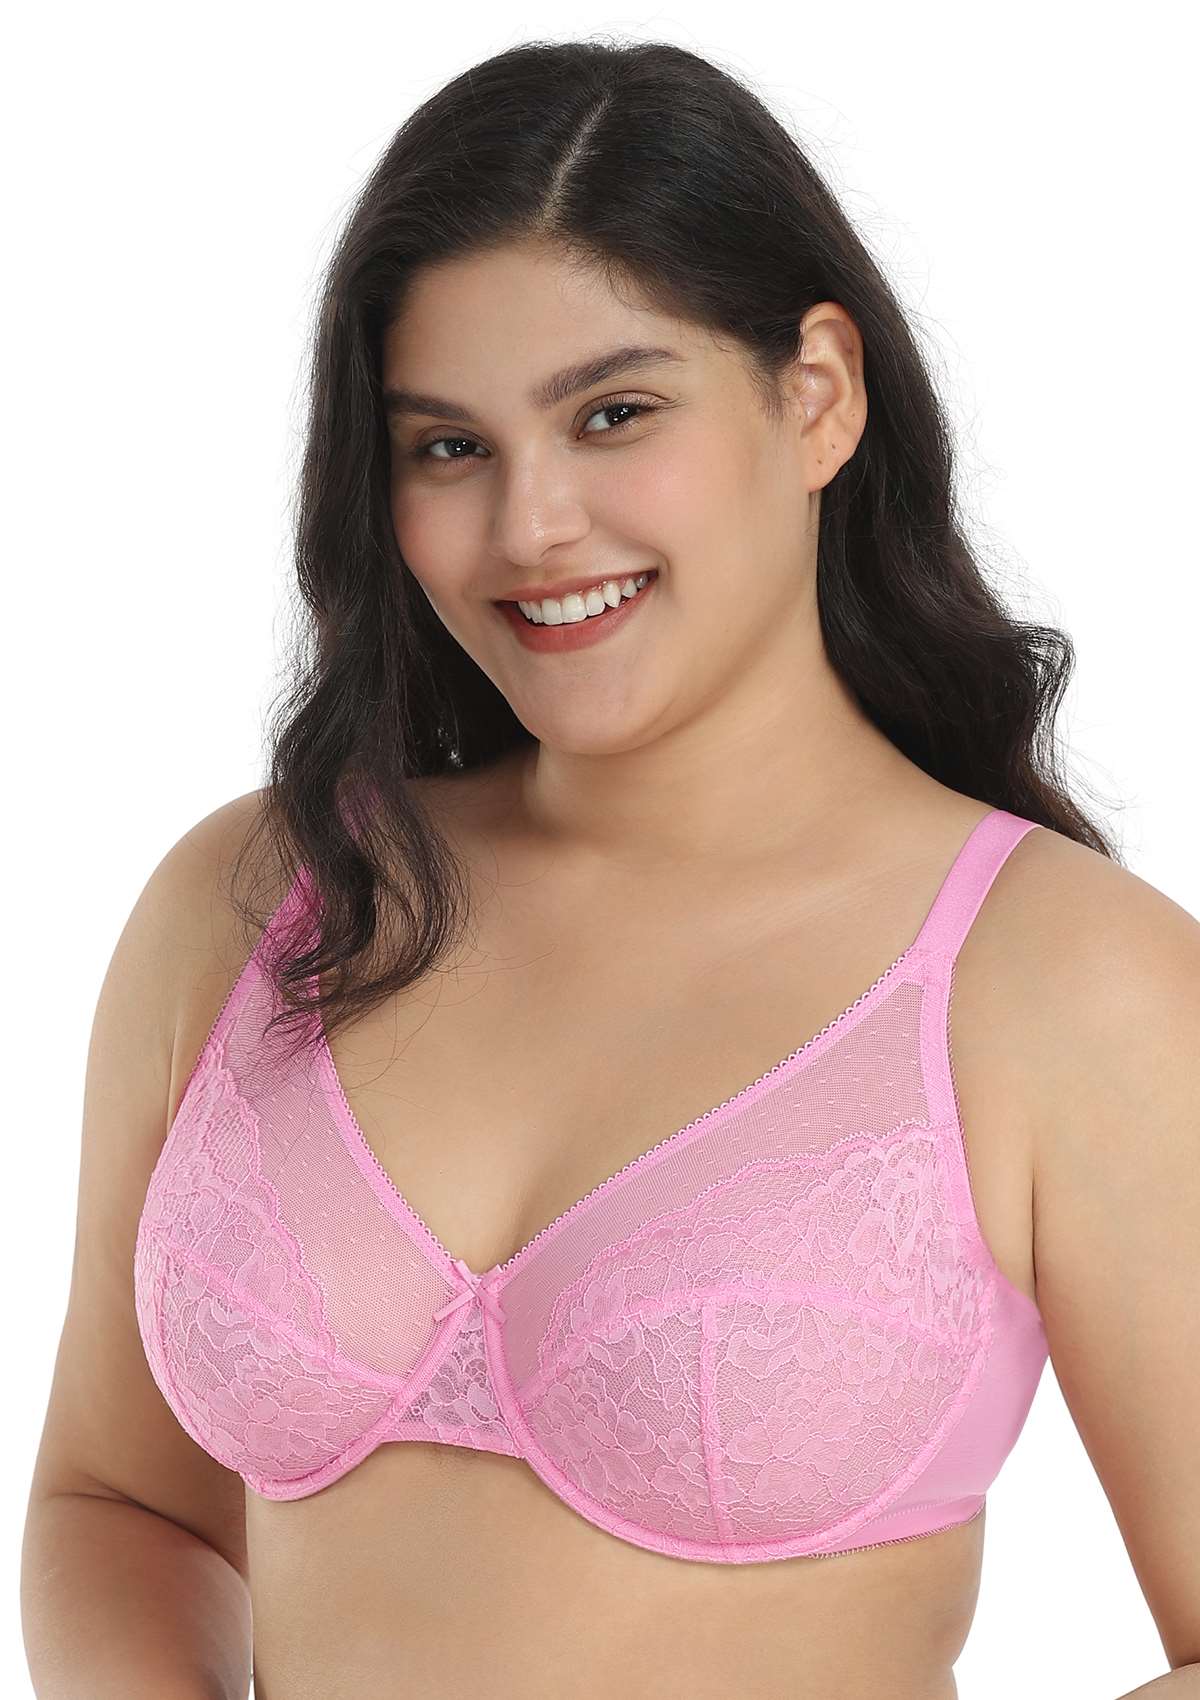 HSIA Enchante Lacy Bra: Comfy Sheer Lace Bra With Lift - Dusty Peach / 34 / C